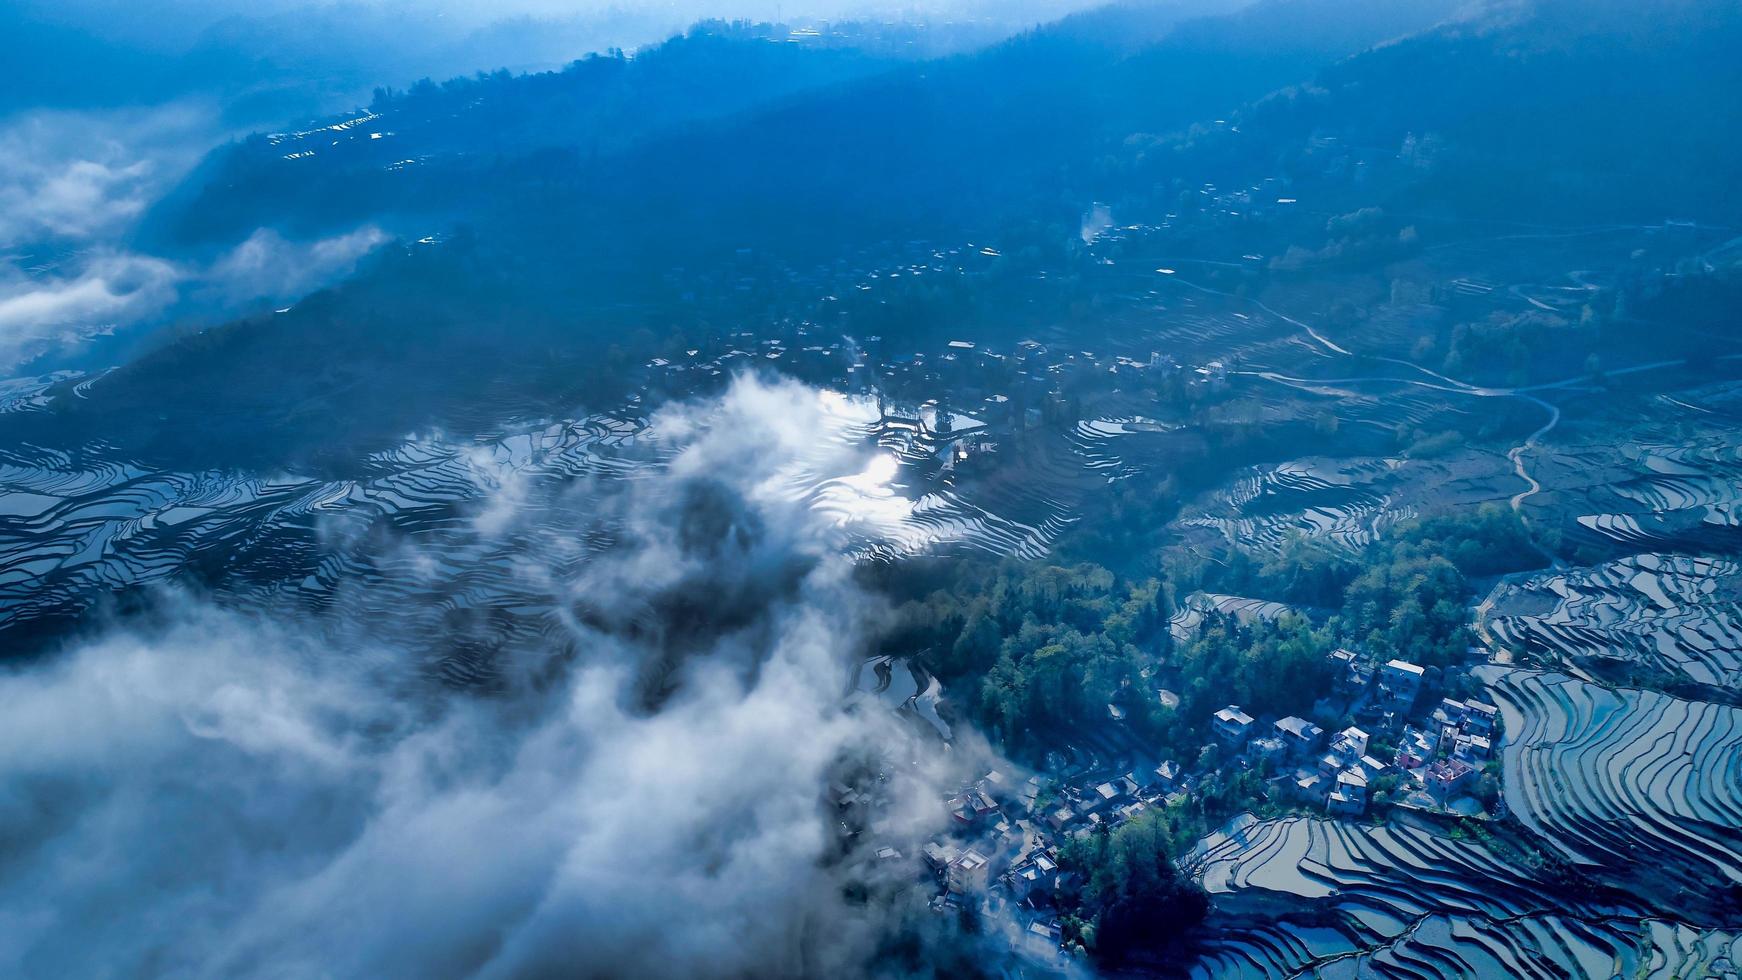 Clouds over the Yuanyang terraces photo